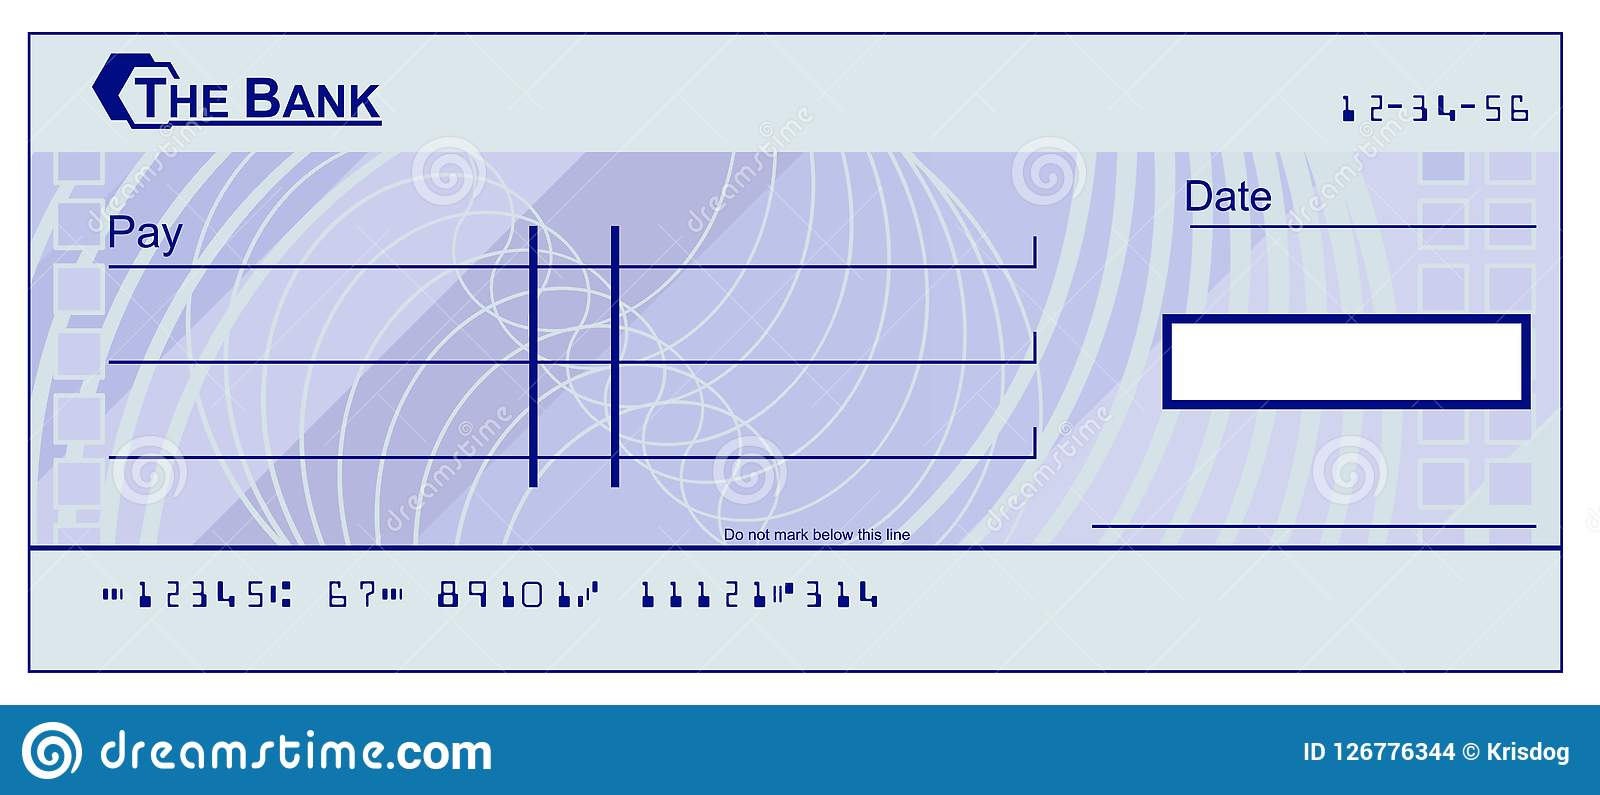 Blank Cheque Stock Vector. Illustration Of Design, Blue With Regard To Blank Cheque Template Download Free